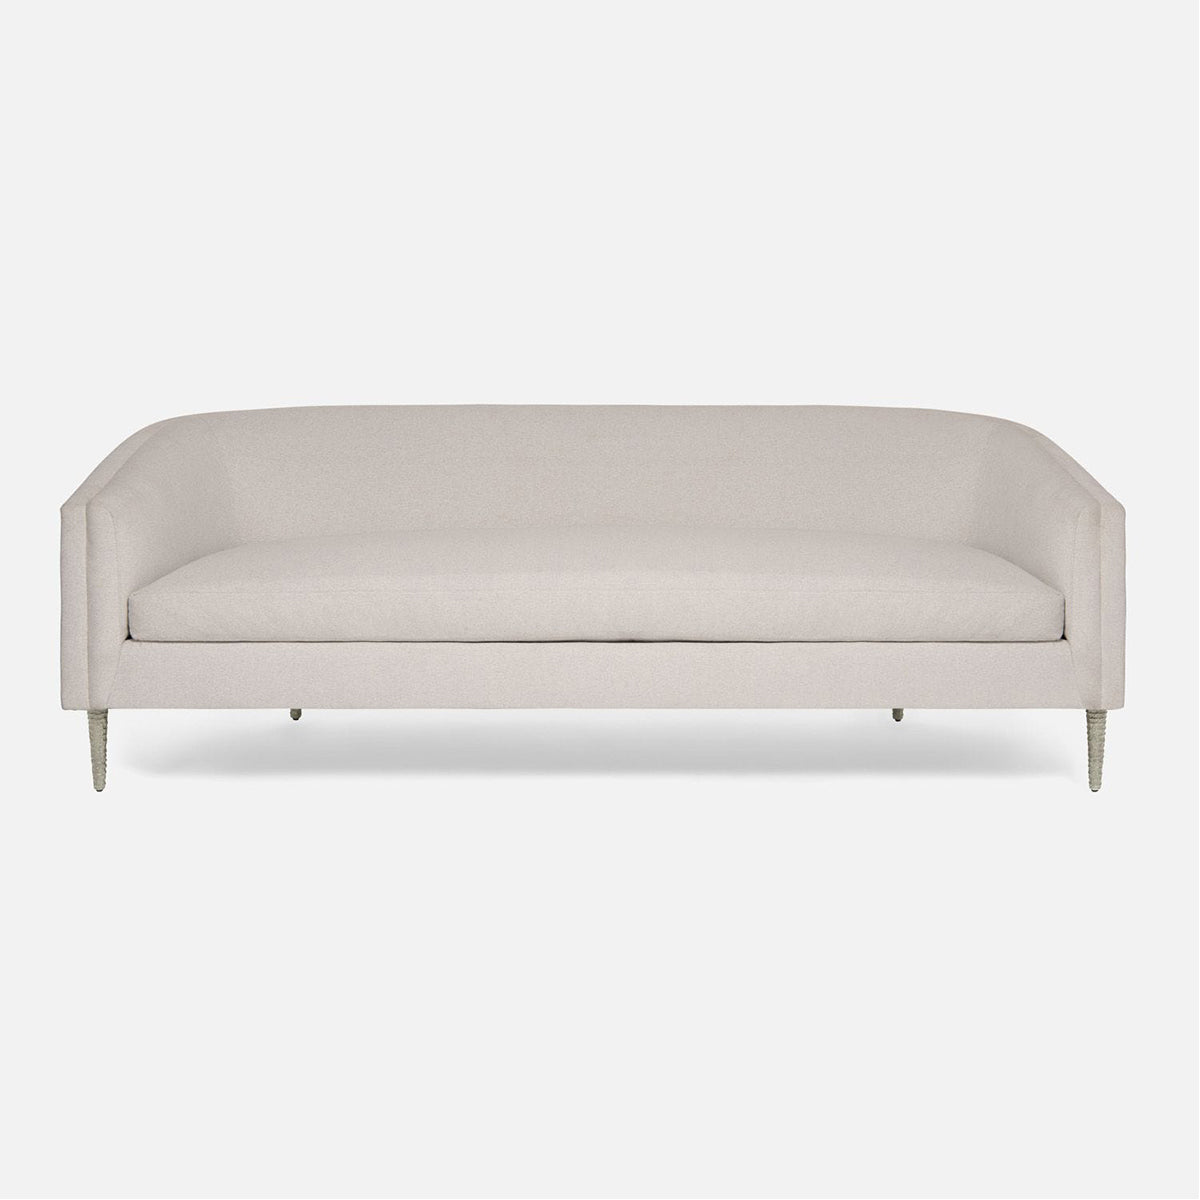 Made Goods Theron Upholstered Curved Back Sofa in Humboldt Cotton Jute